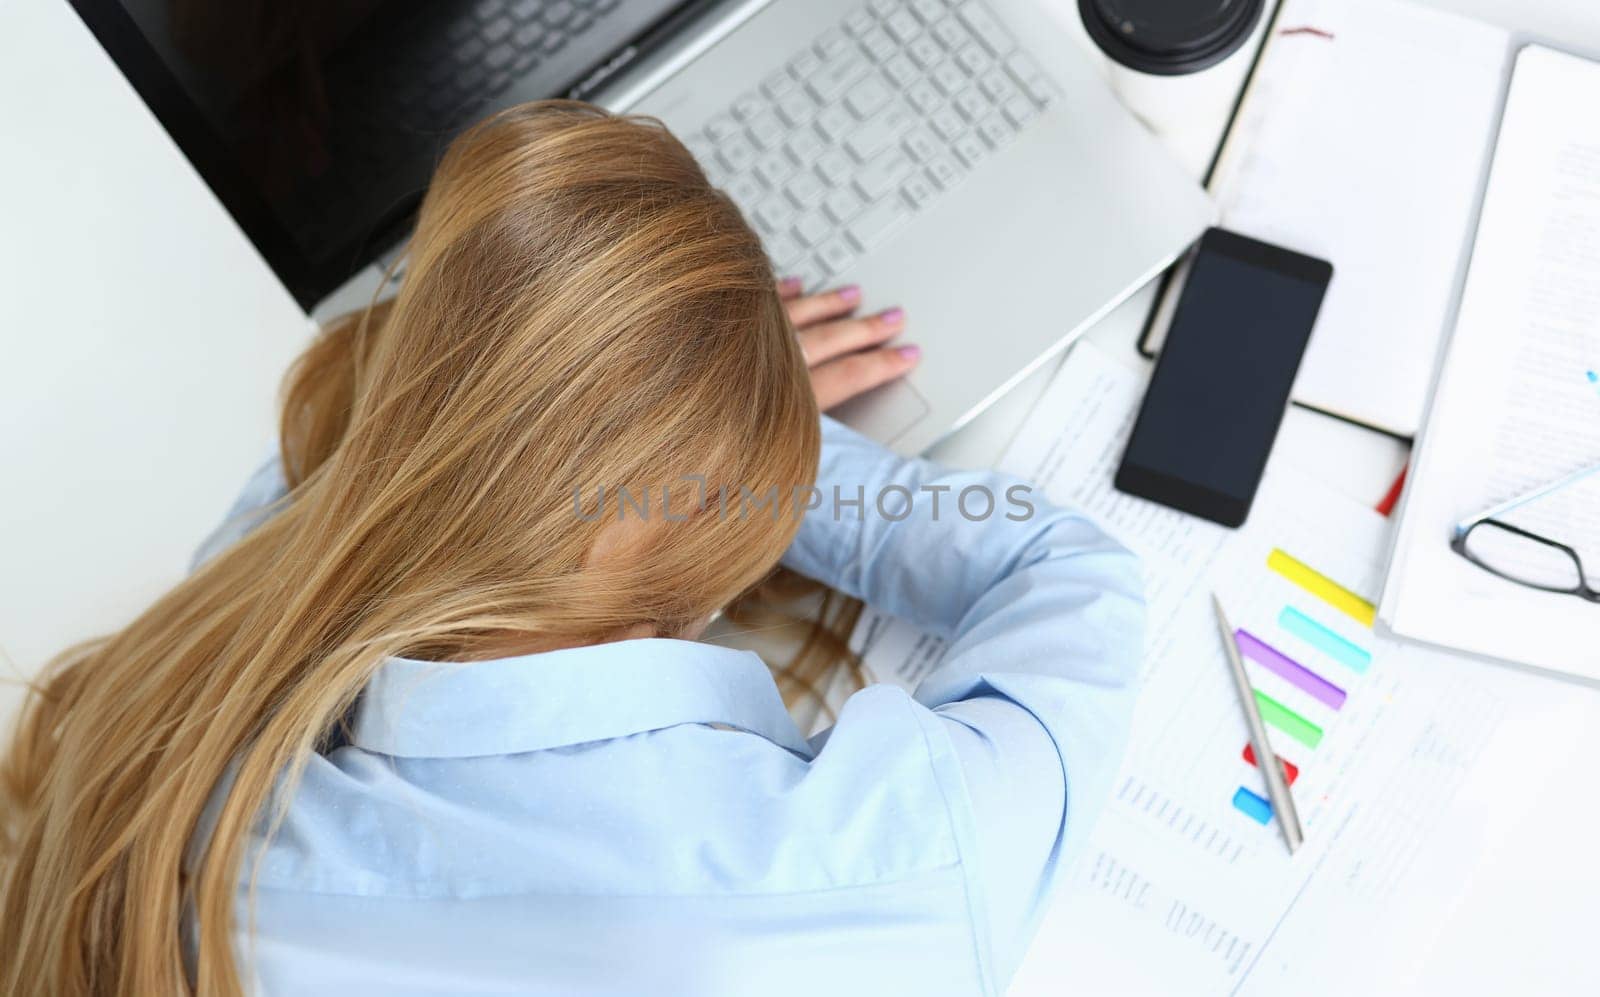 Lot of work wait for tired and exhausted woman. Huge pile of document folders headache and depression irs new problems emotion expression vacancy or holiday dream concept